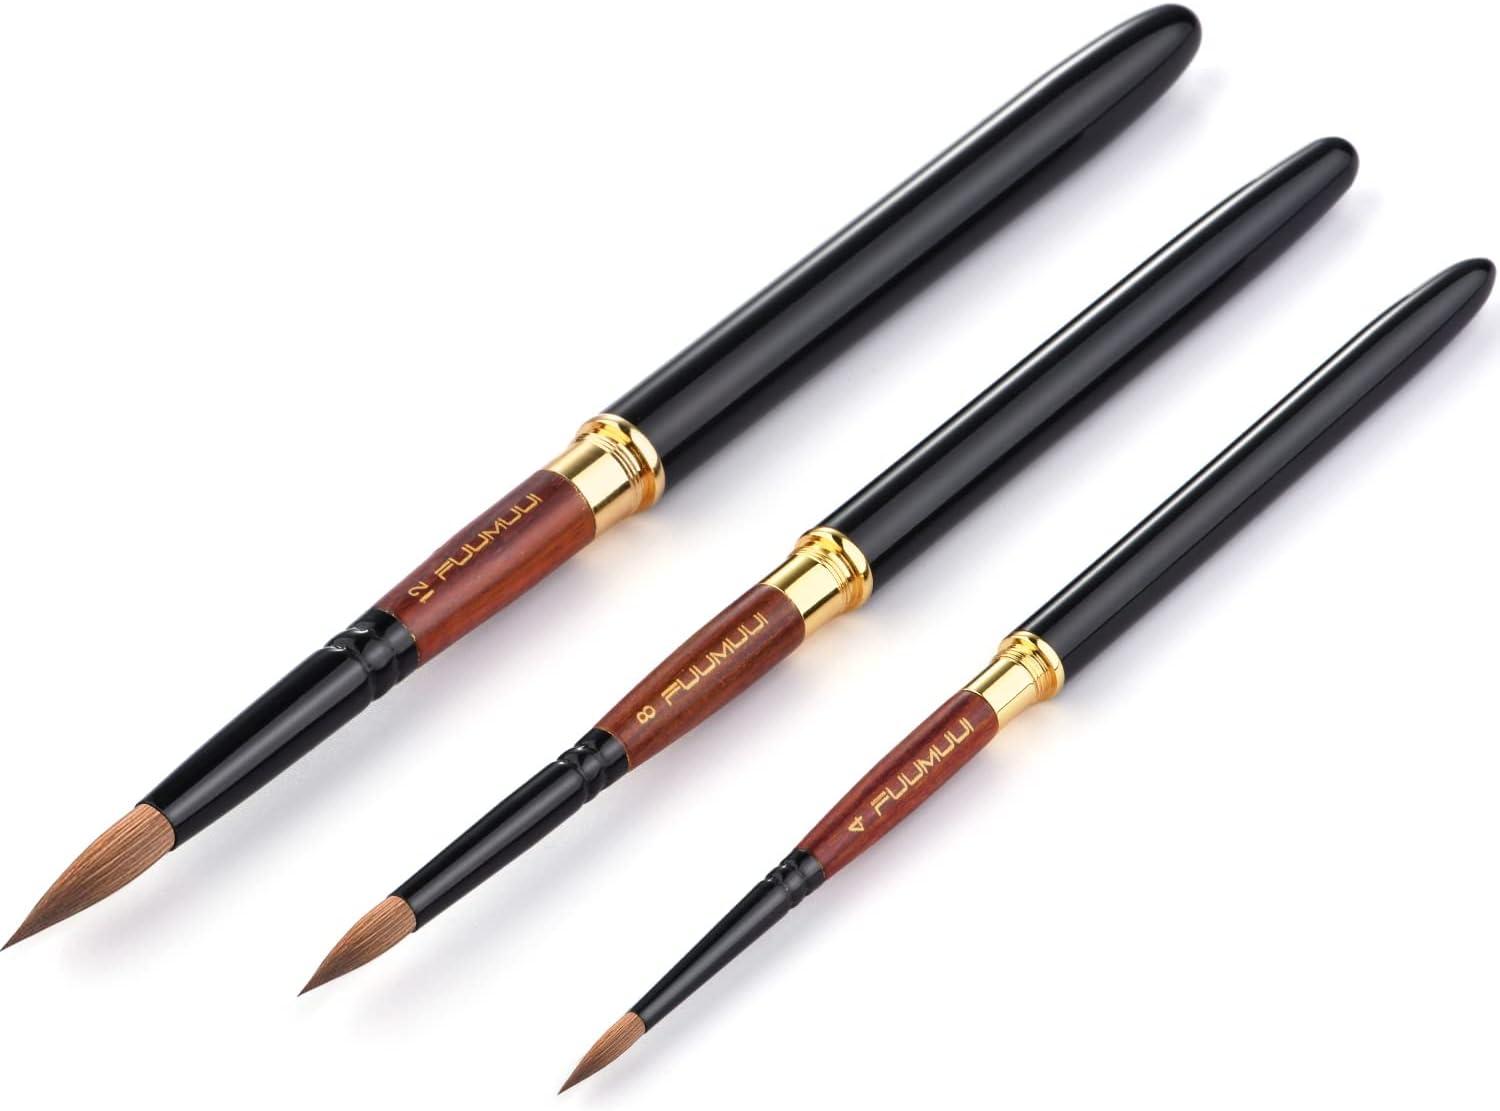 Sable Travel Watercolor Brushes, 3pcs Kolinsky Sable Hair Round Artist Paint Brushes with Pocket Protective Case, Perfect for Watercolor Acrylics